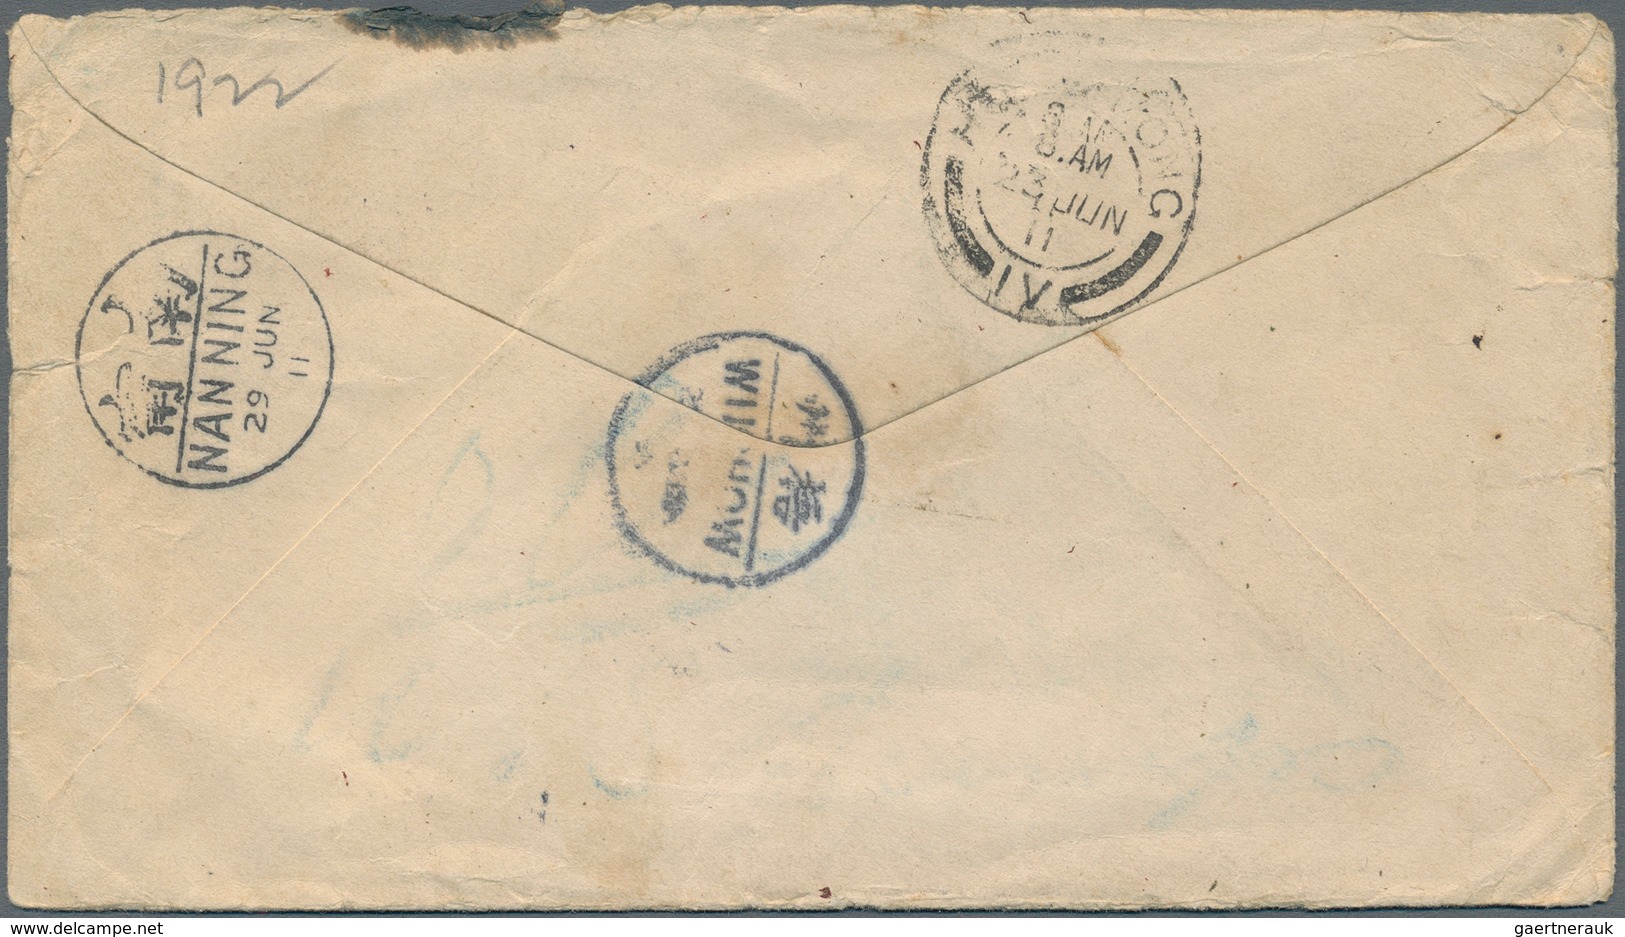 China - Incoming Mail: 1911, USA, Envelope Lincoln 5 C. "Brooklyn May 24 1911" To Wuchow, On Reverse - Other & Unclassified